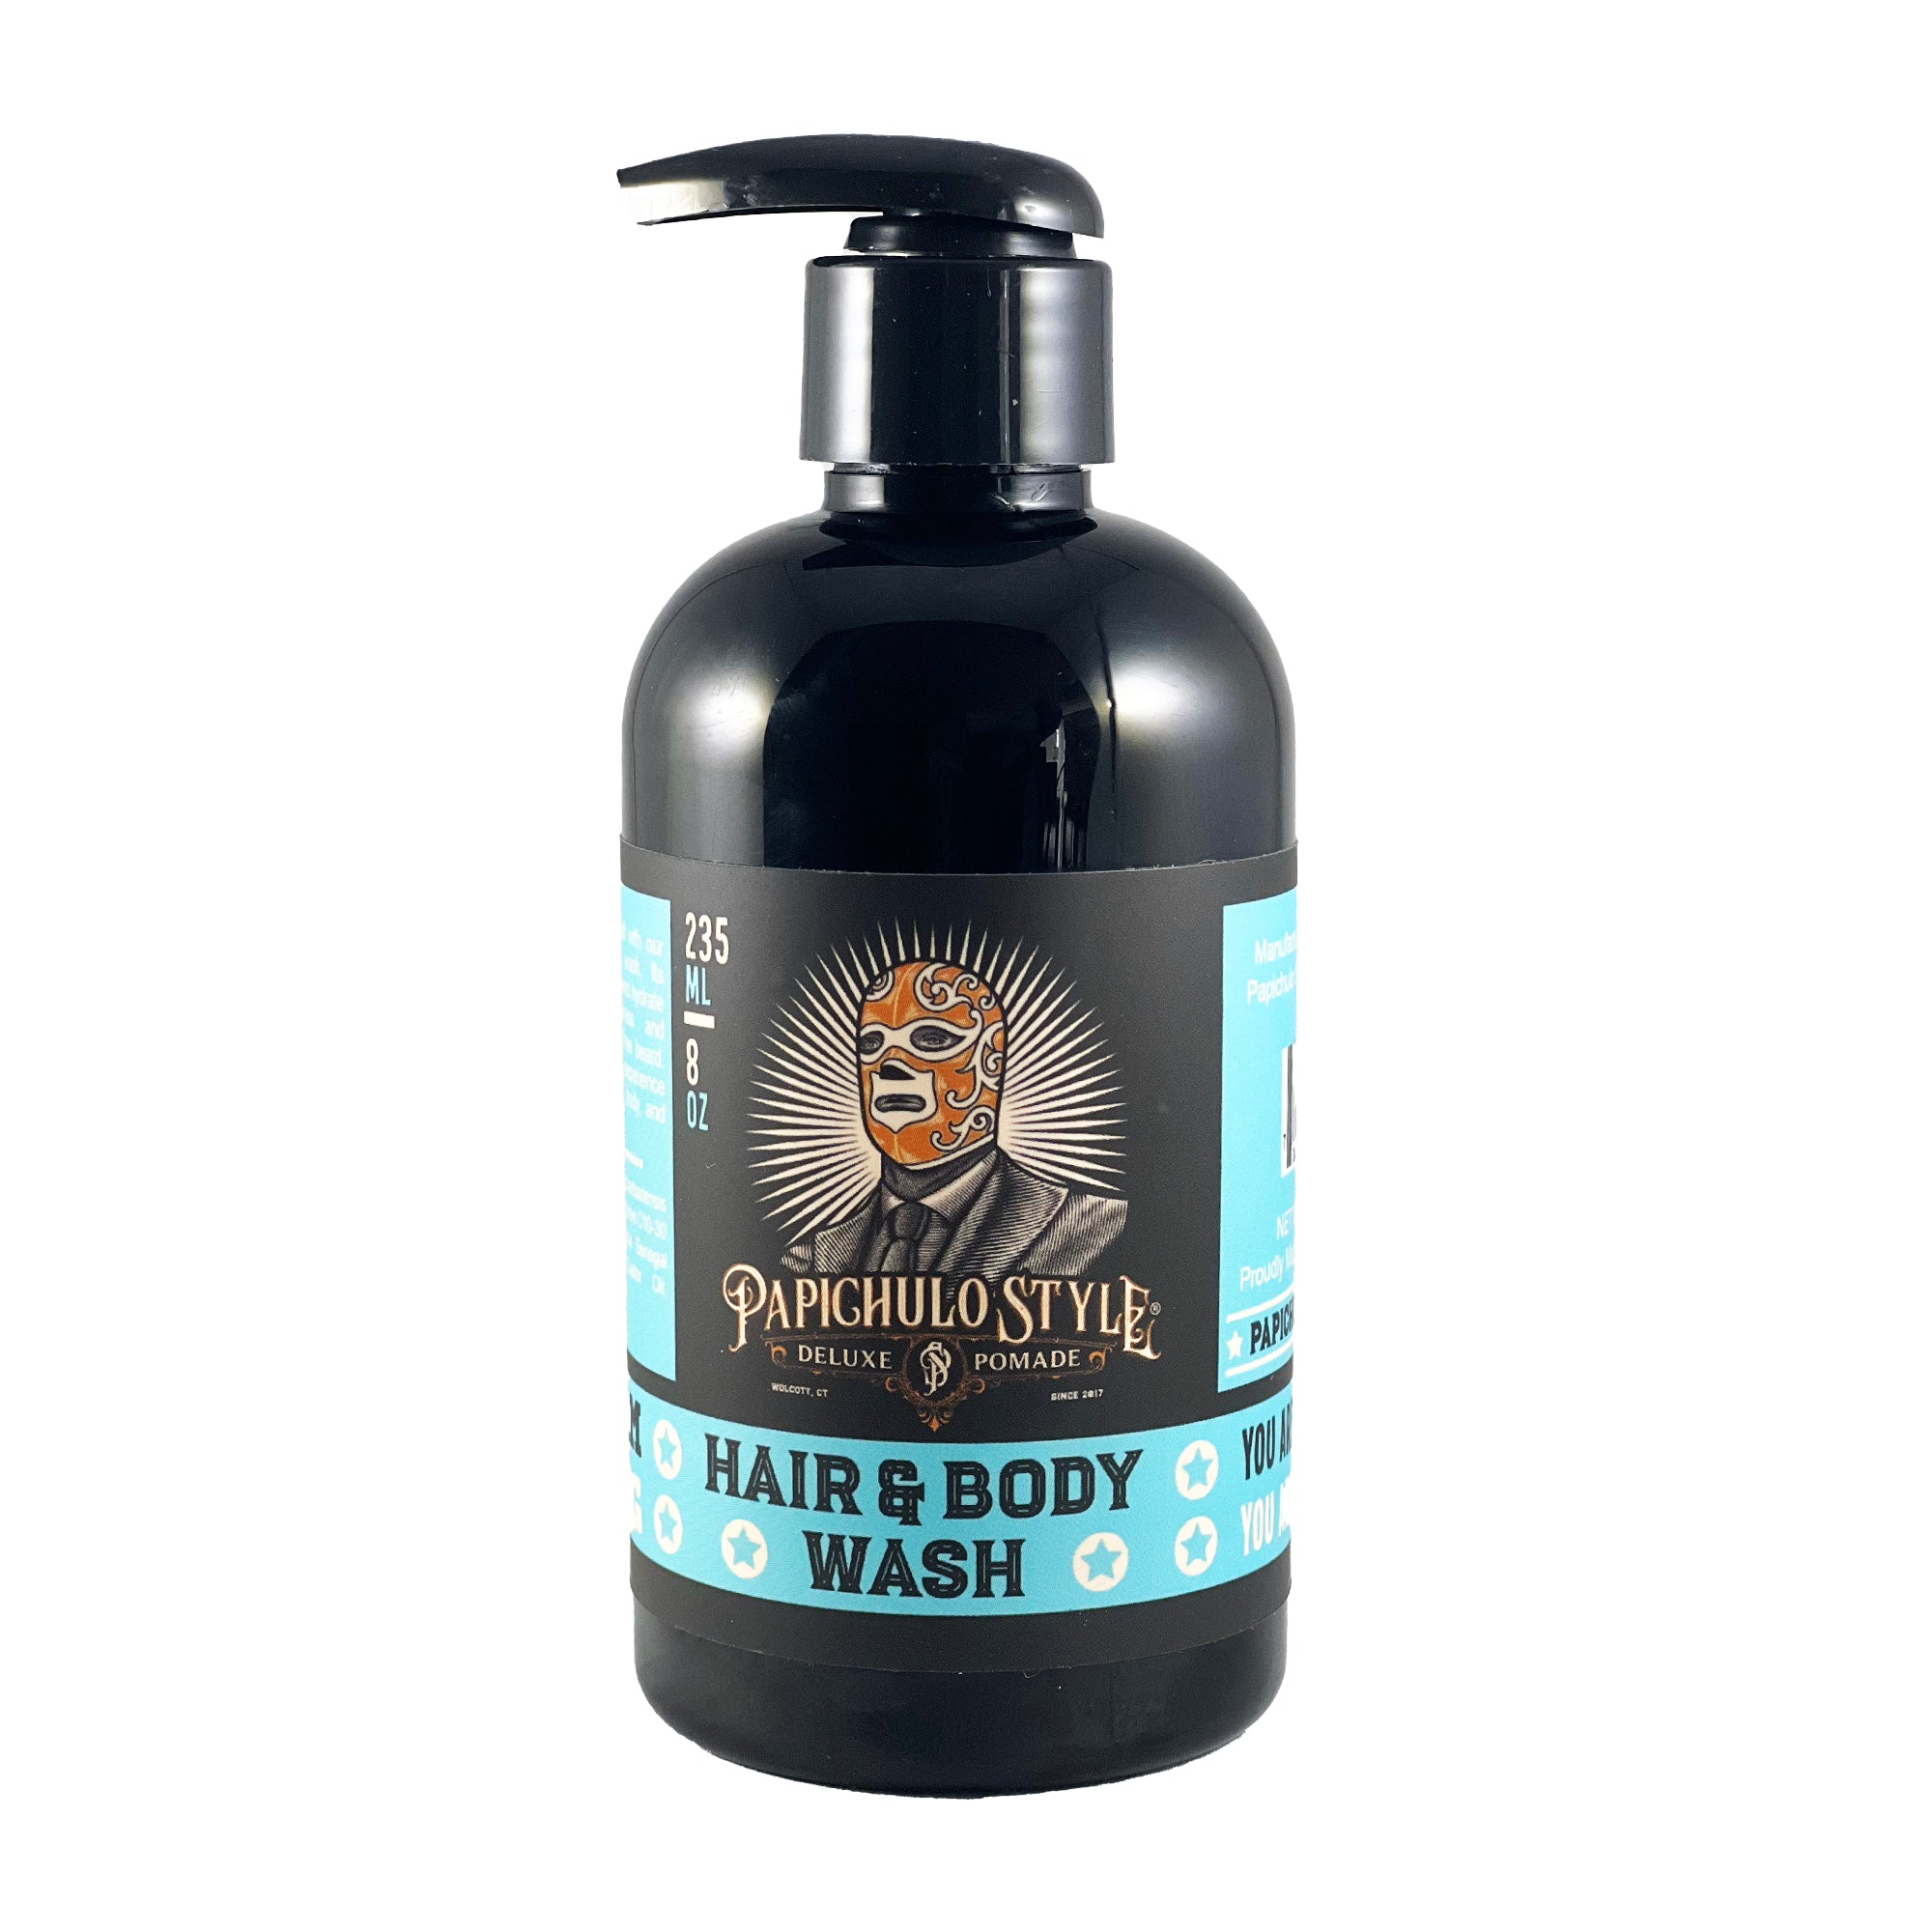 Papichulo Style Body & Hair Wash - Papichulo Style